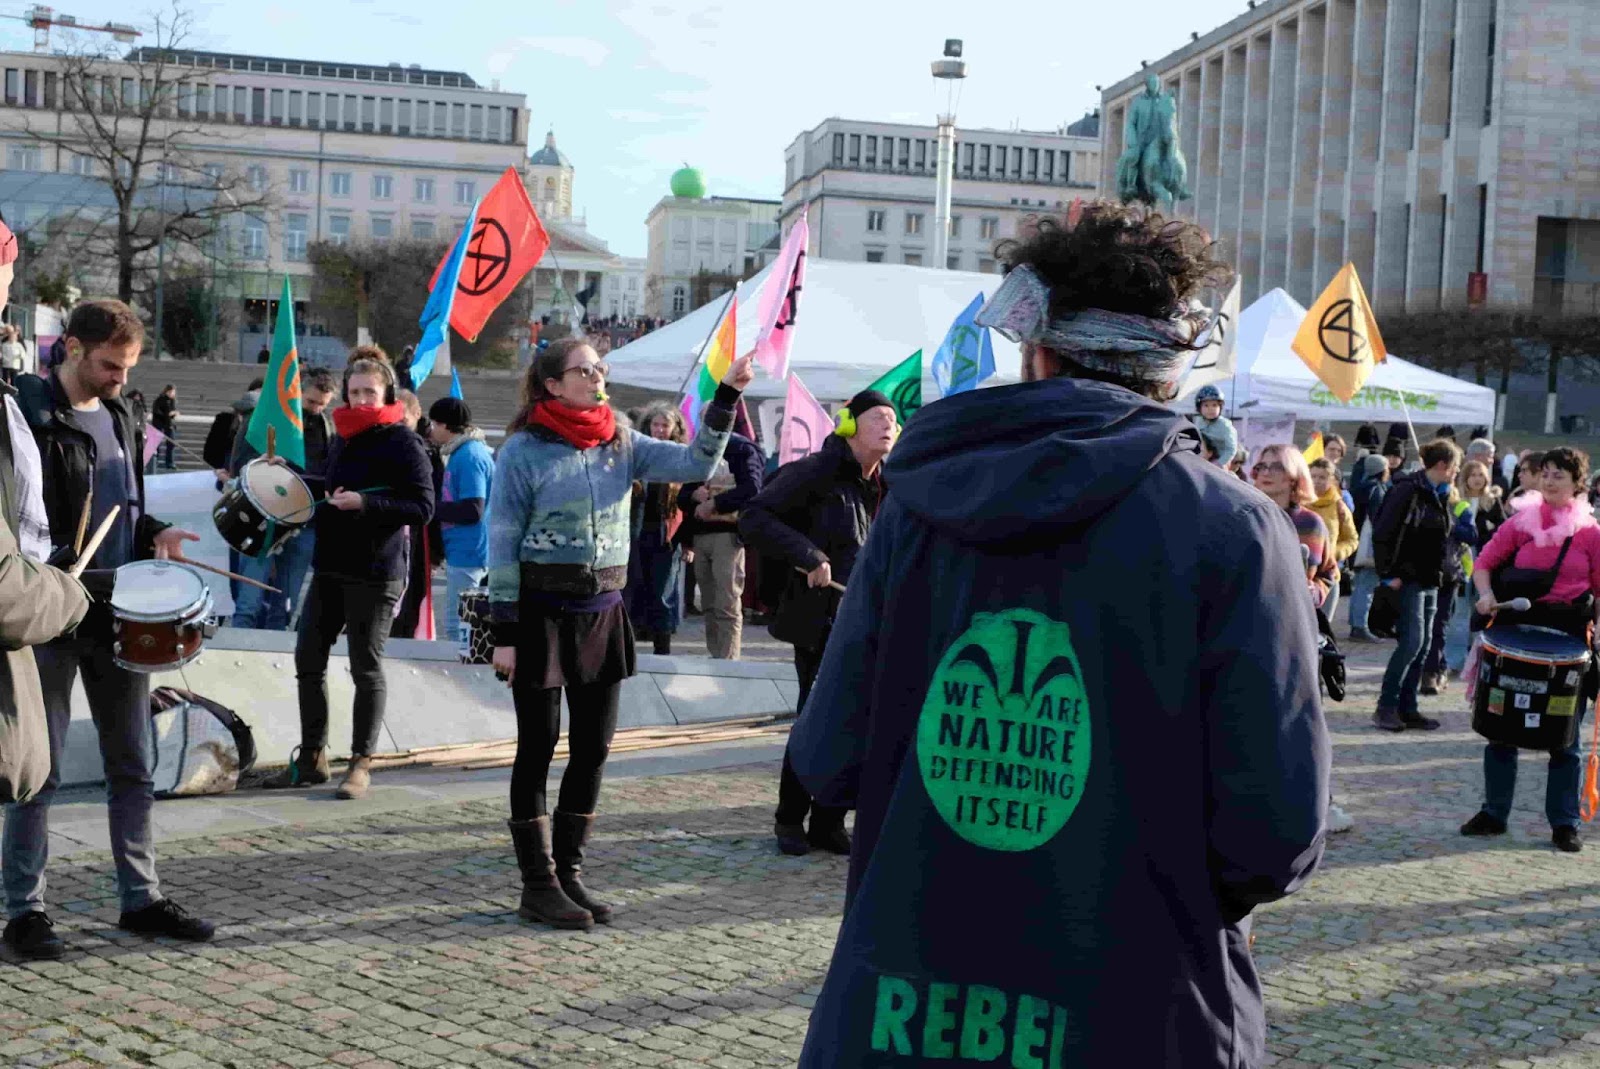 Rebels do discobedience in a public square filled with activists